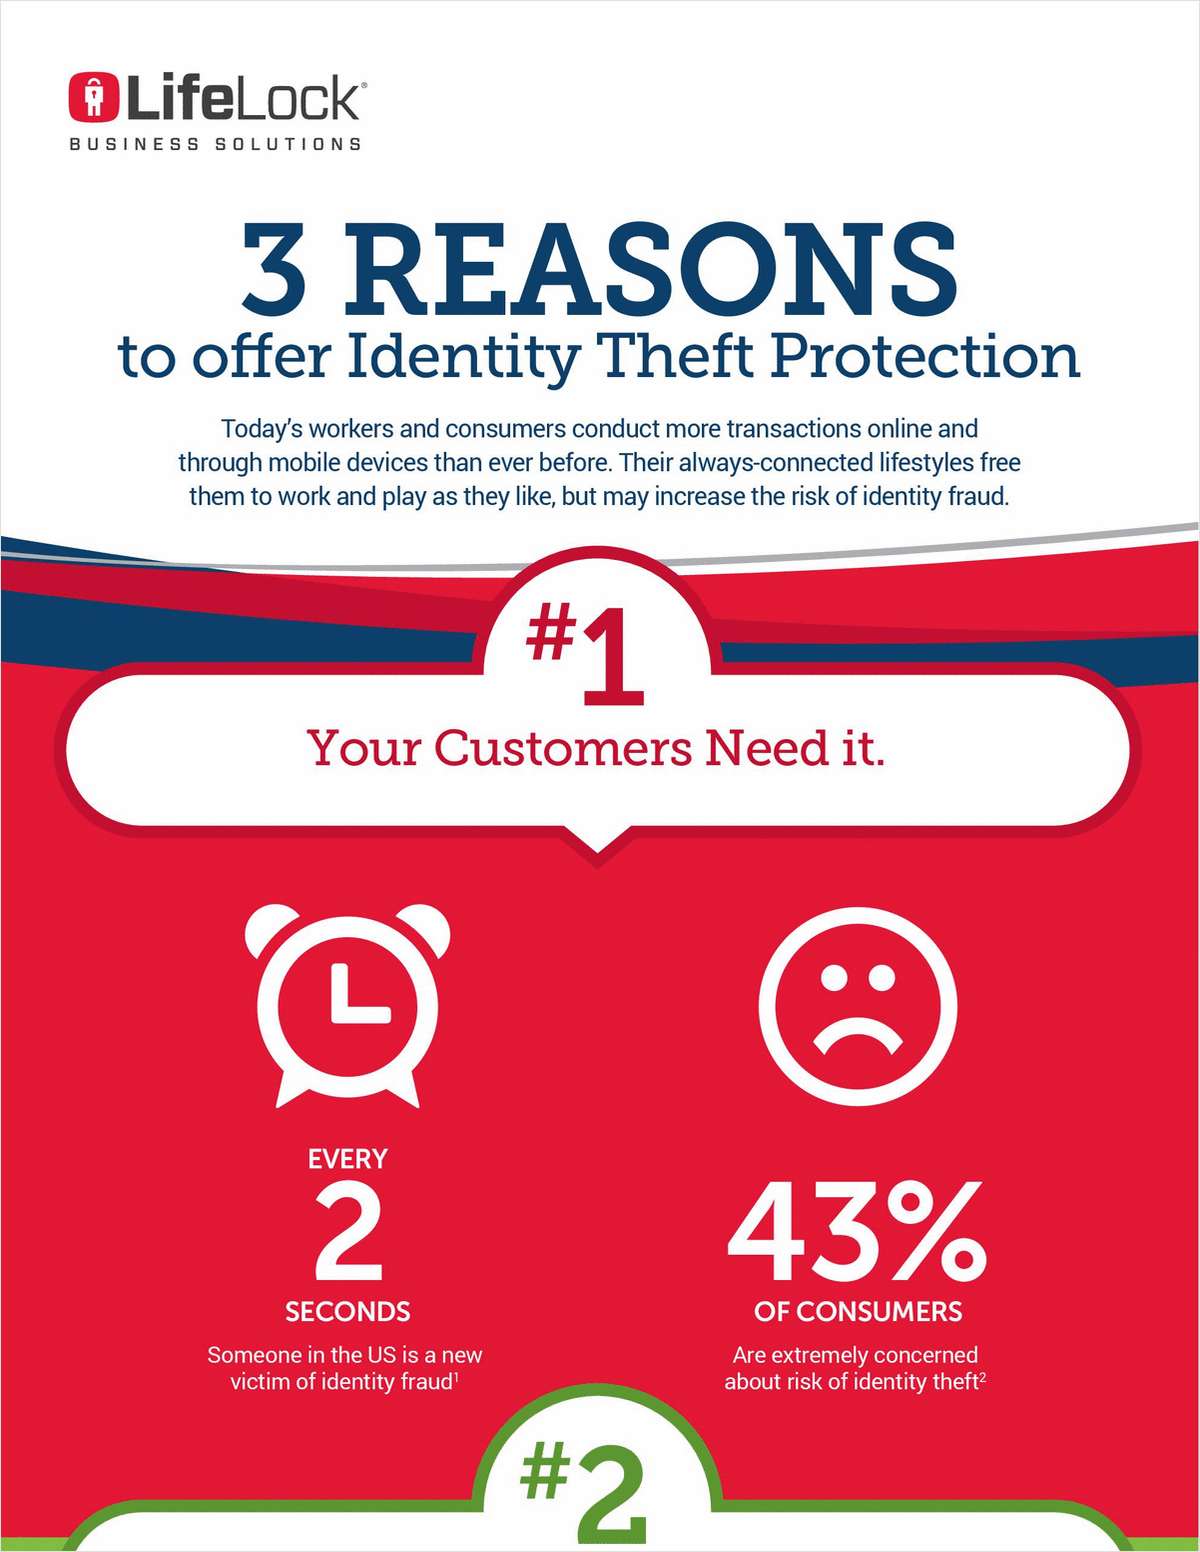 3 REASONS to Offer Identity Theft Protection